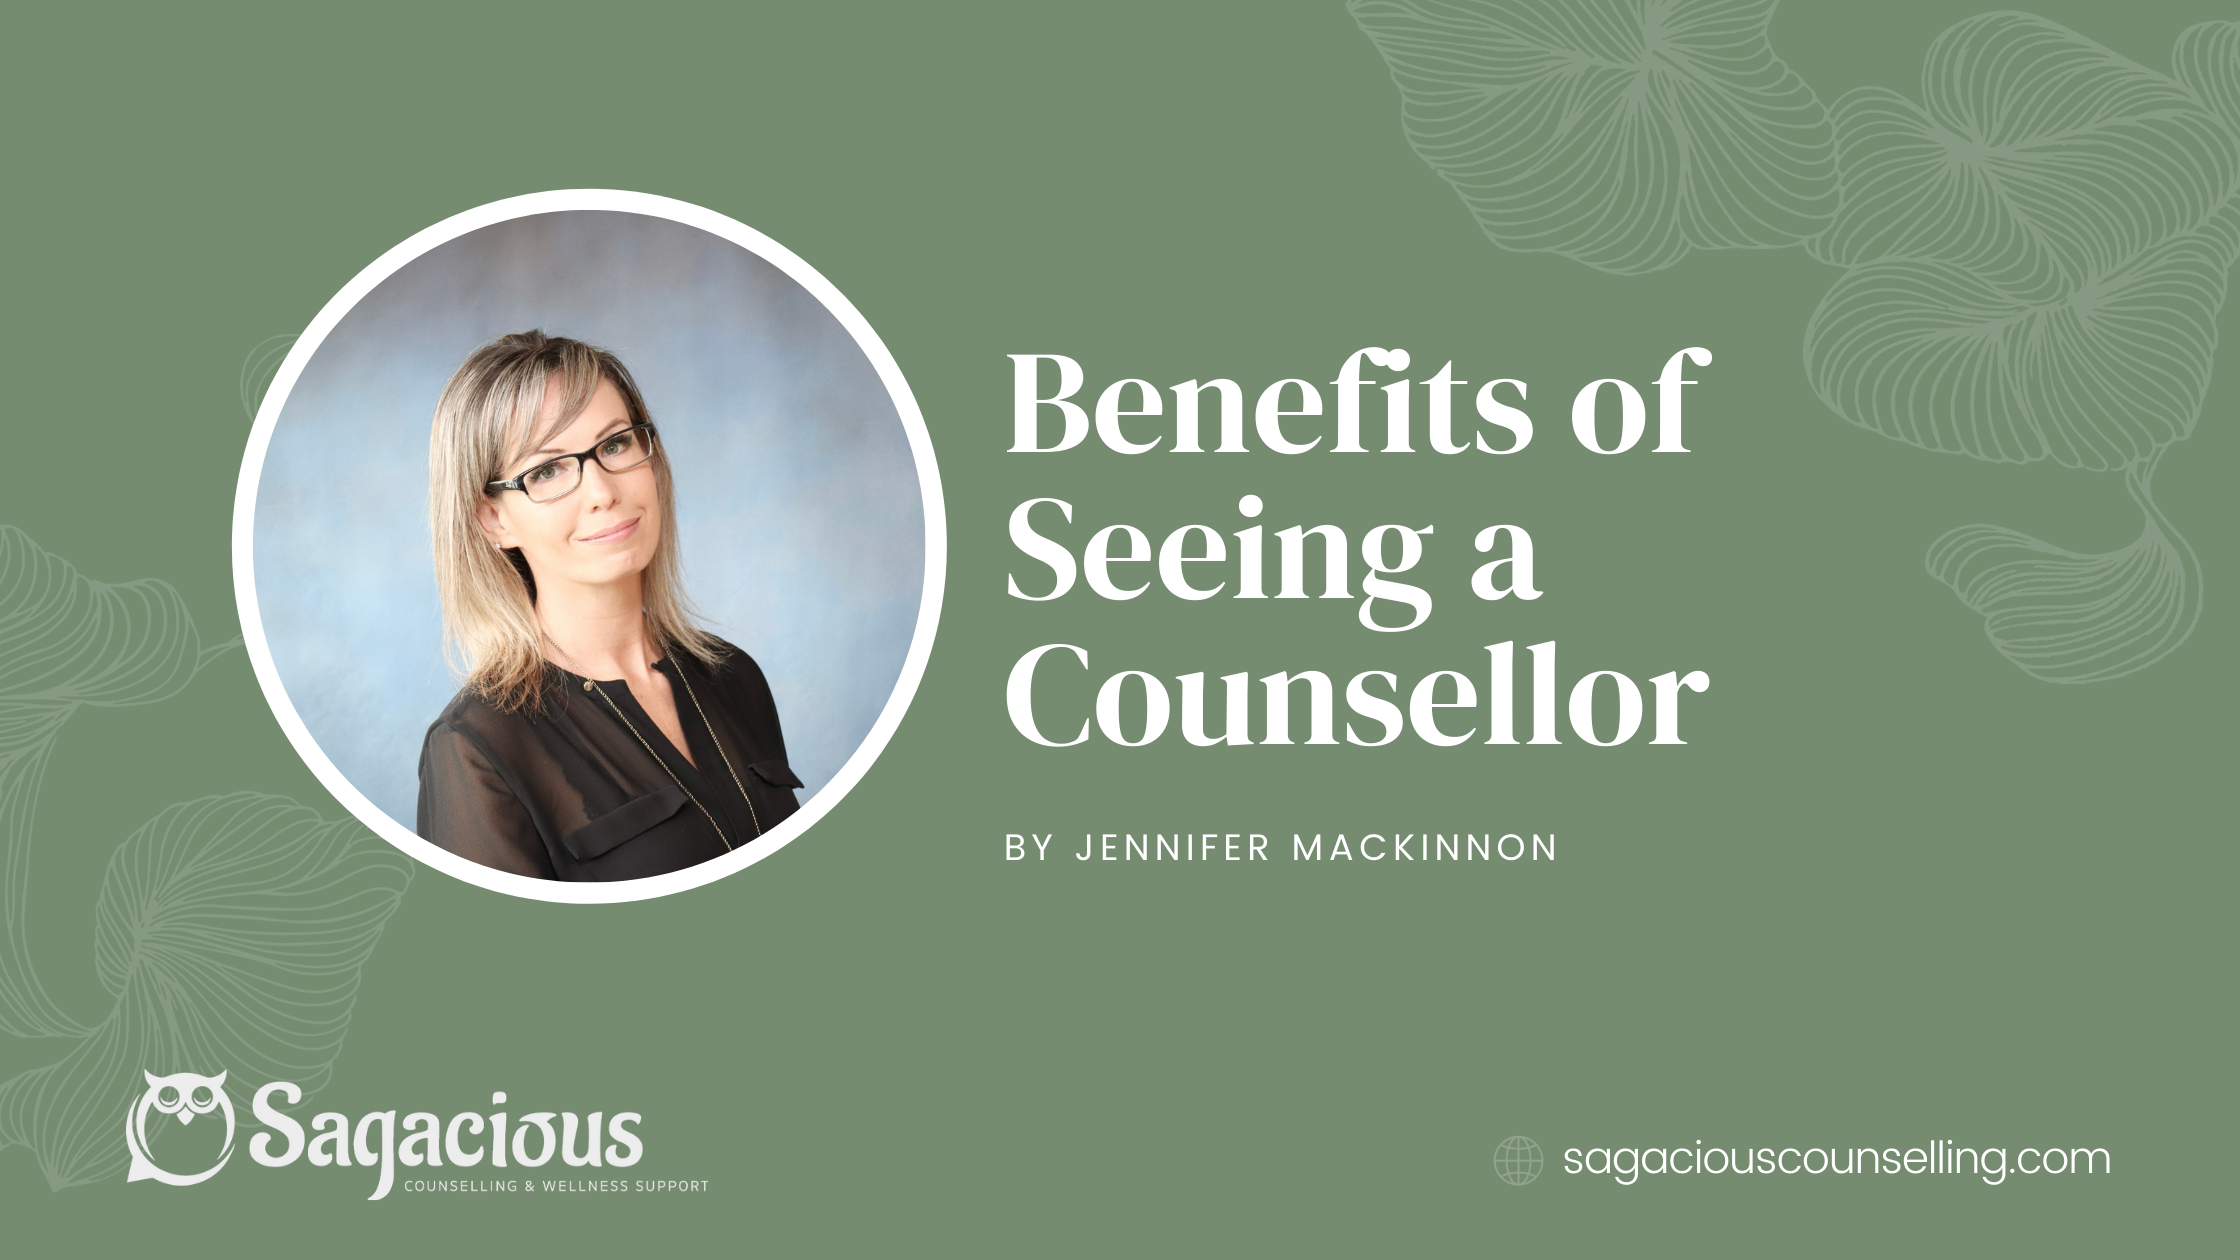 Benefits of Seeing a Counsellor